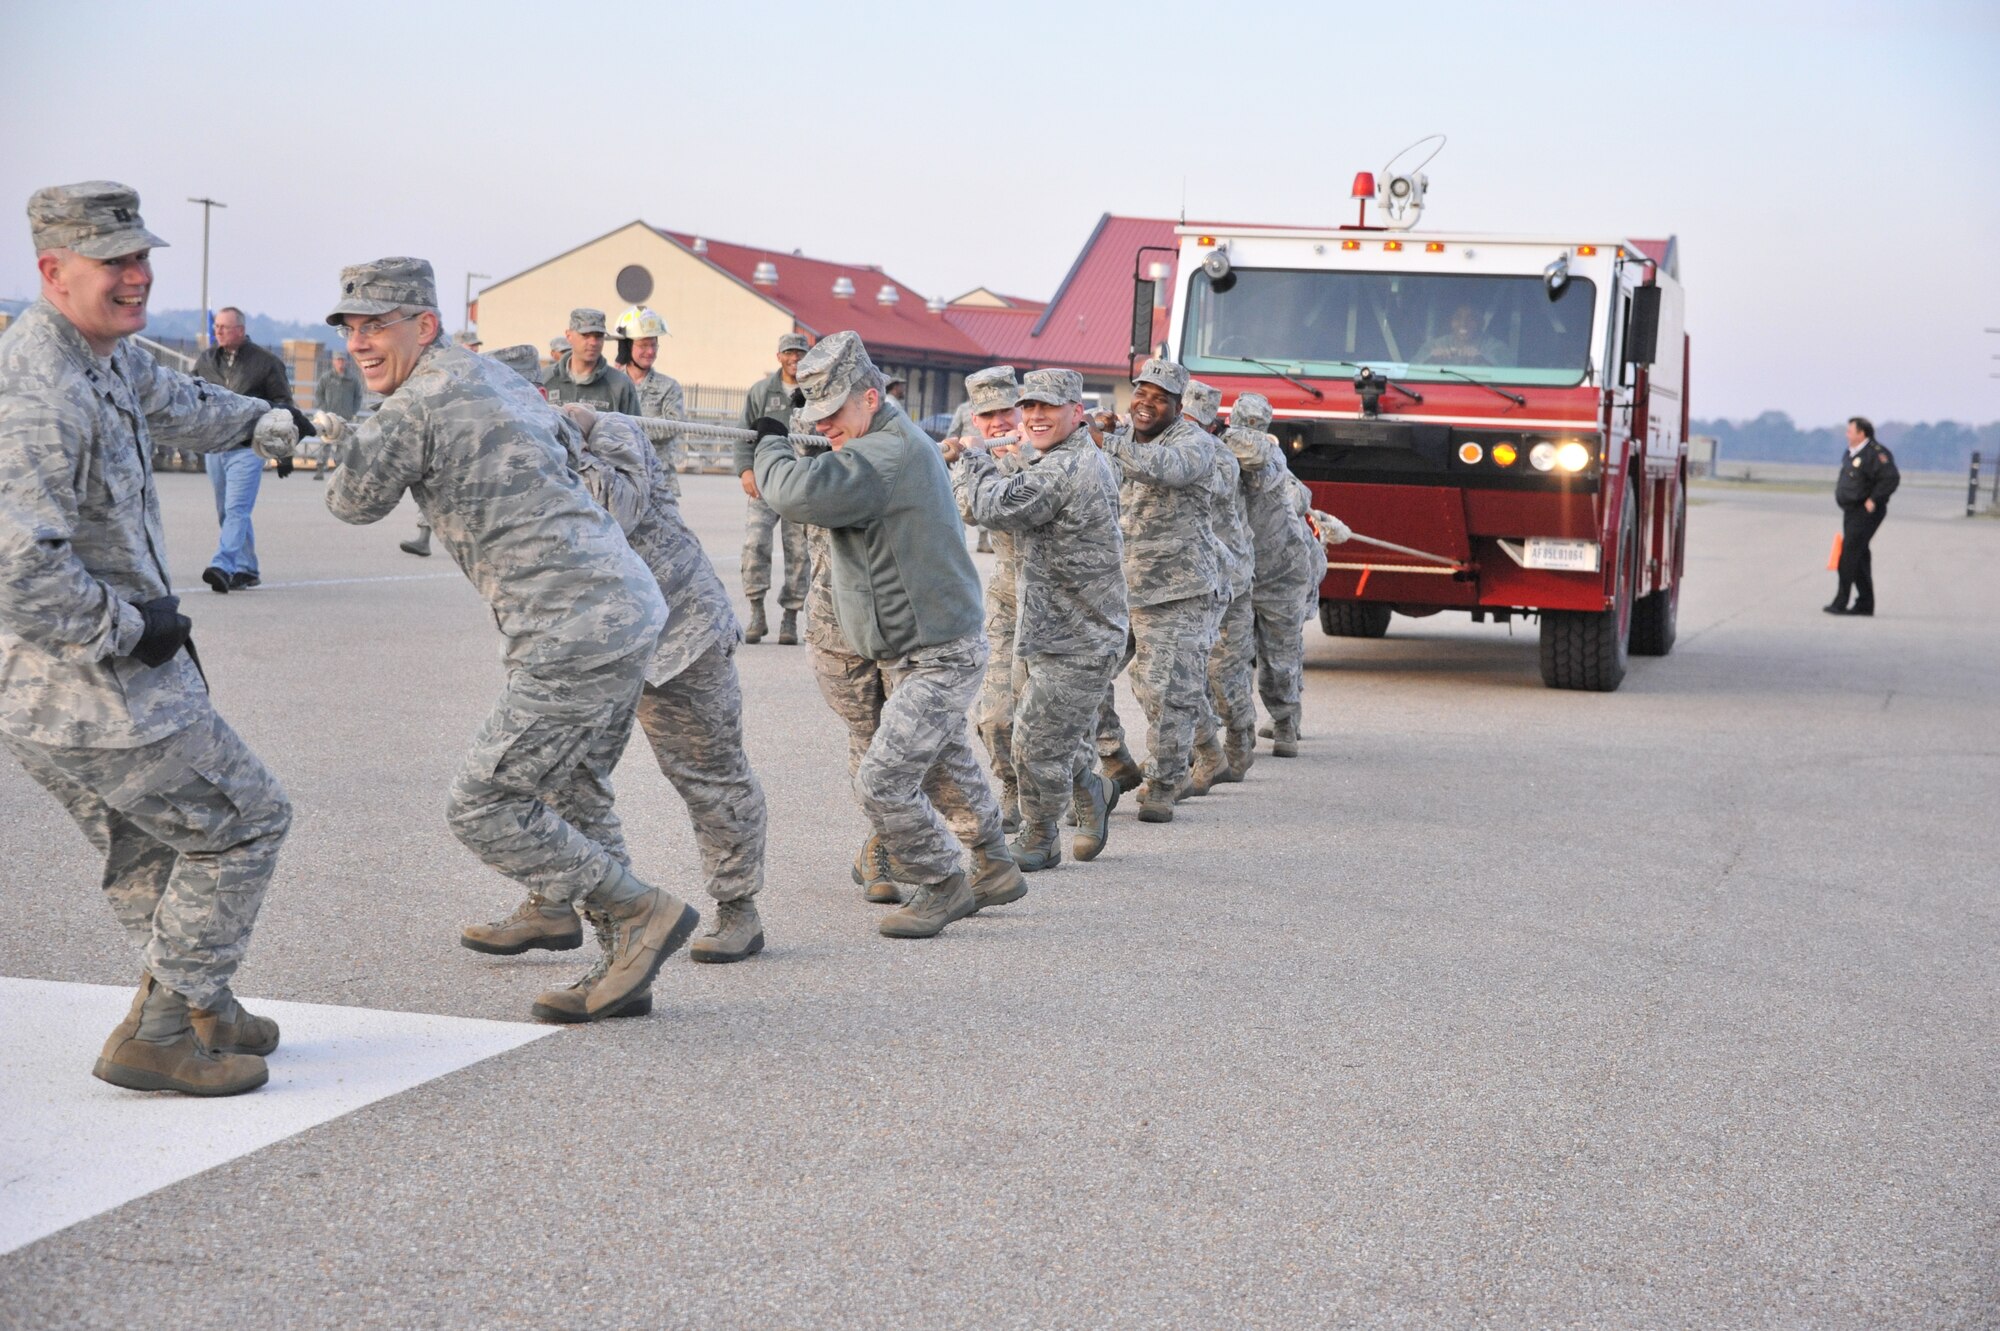 Maxwell Airmen pull a fire truck as part of the 2013 Air Force Assistance Fund kickoff rally March 29. The event also featured a formation run and a tug of war competition. (U.S. Air Force photo by Staff Sgt. Sandra Percival)